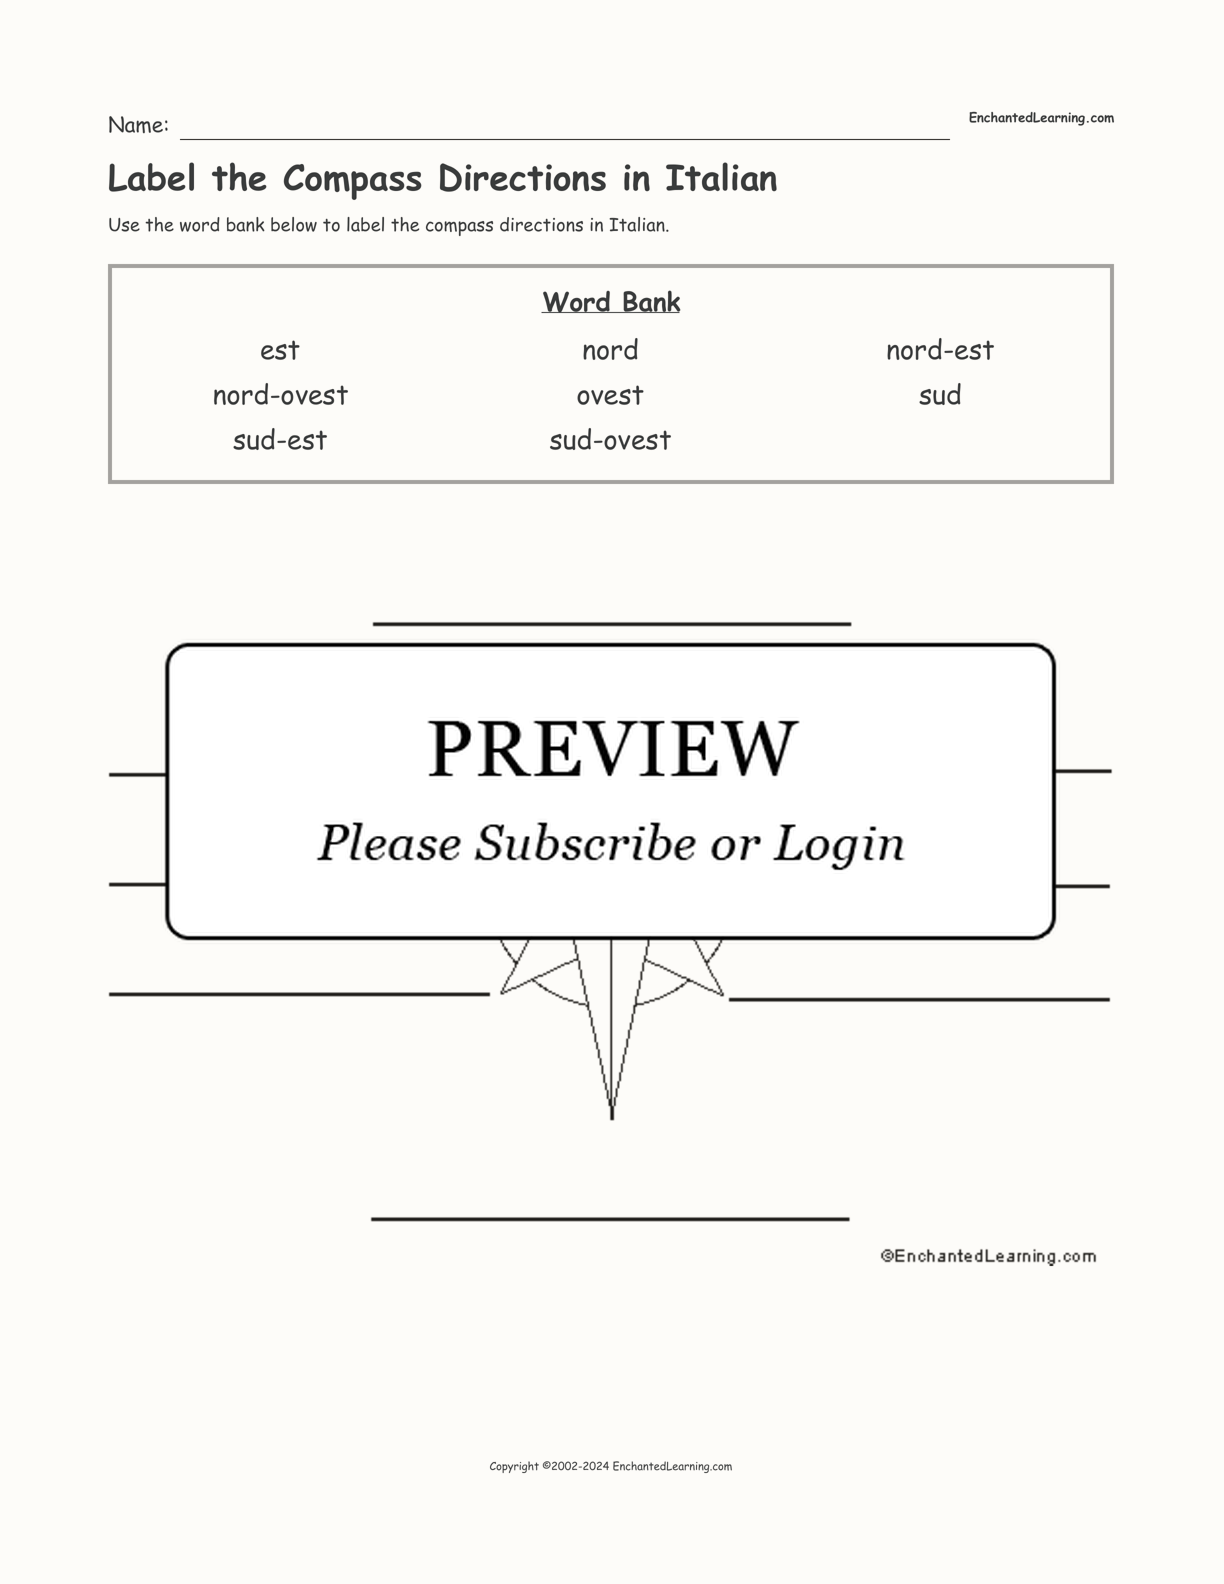 Label the Compass Directions in Italian interactive worksheet page 1